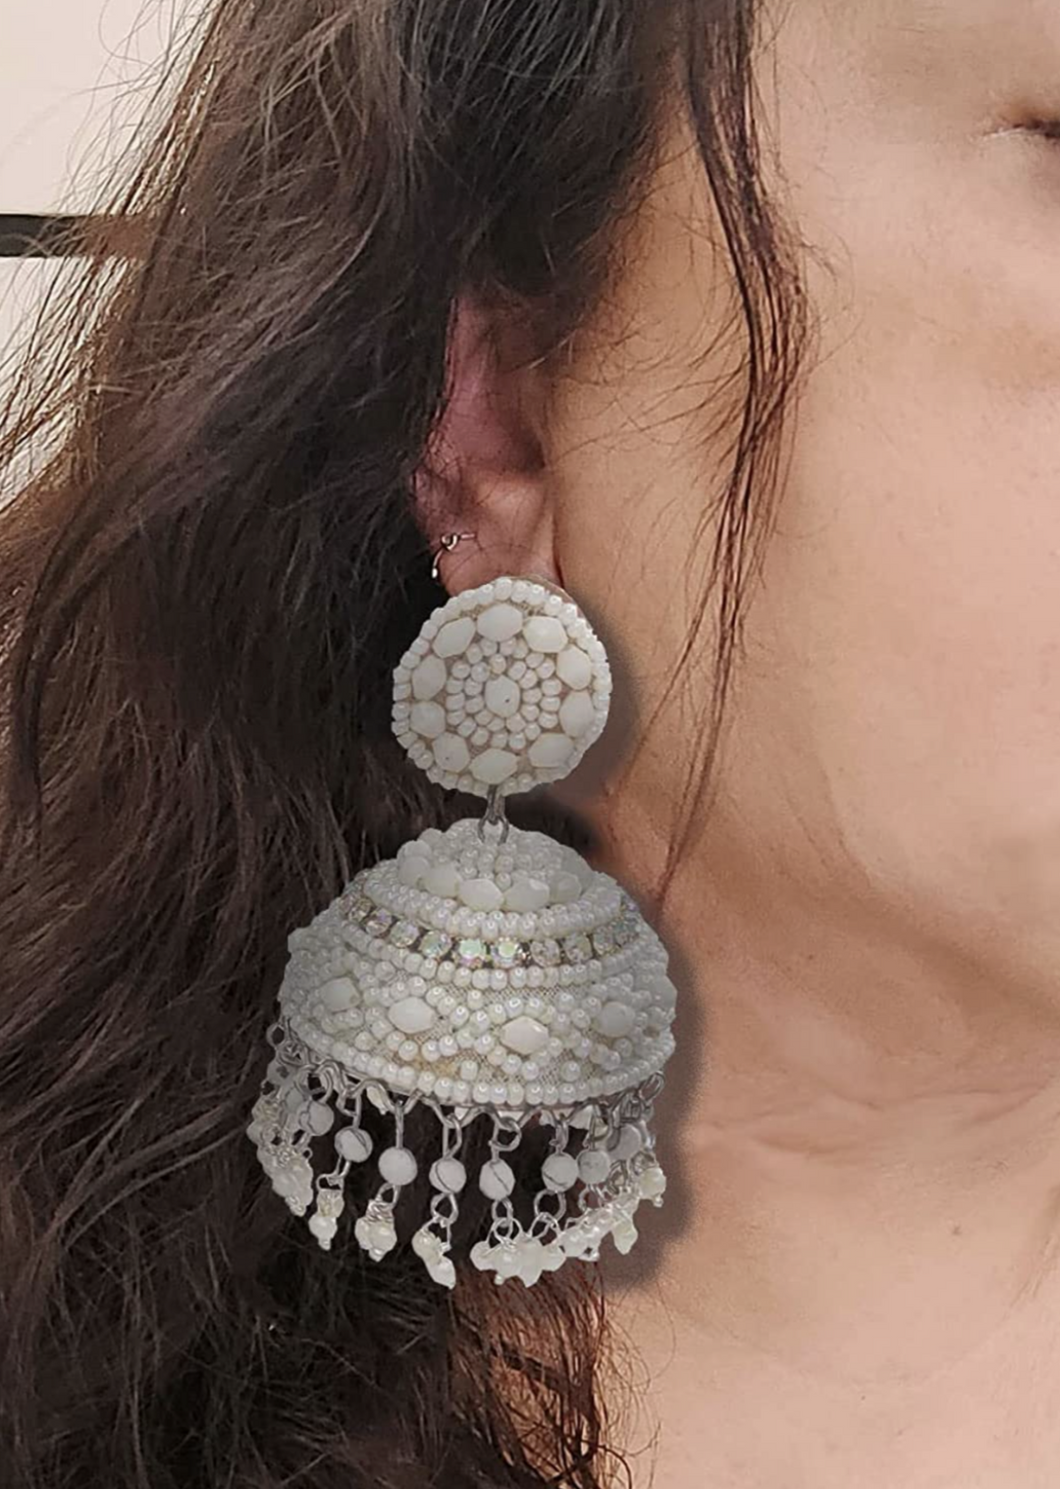 Statement fabric earrings in a traditional jhumka design. White earrings